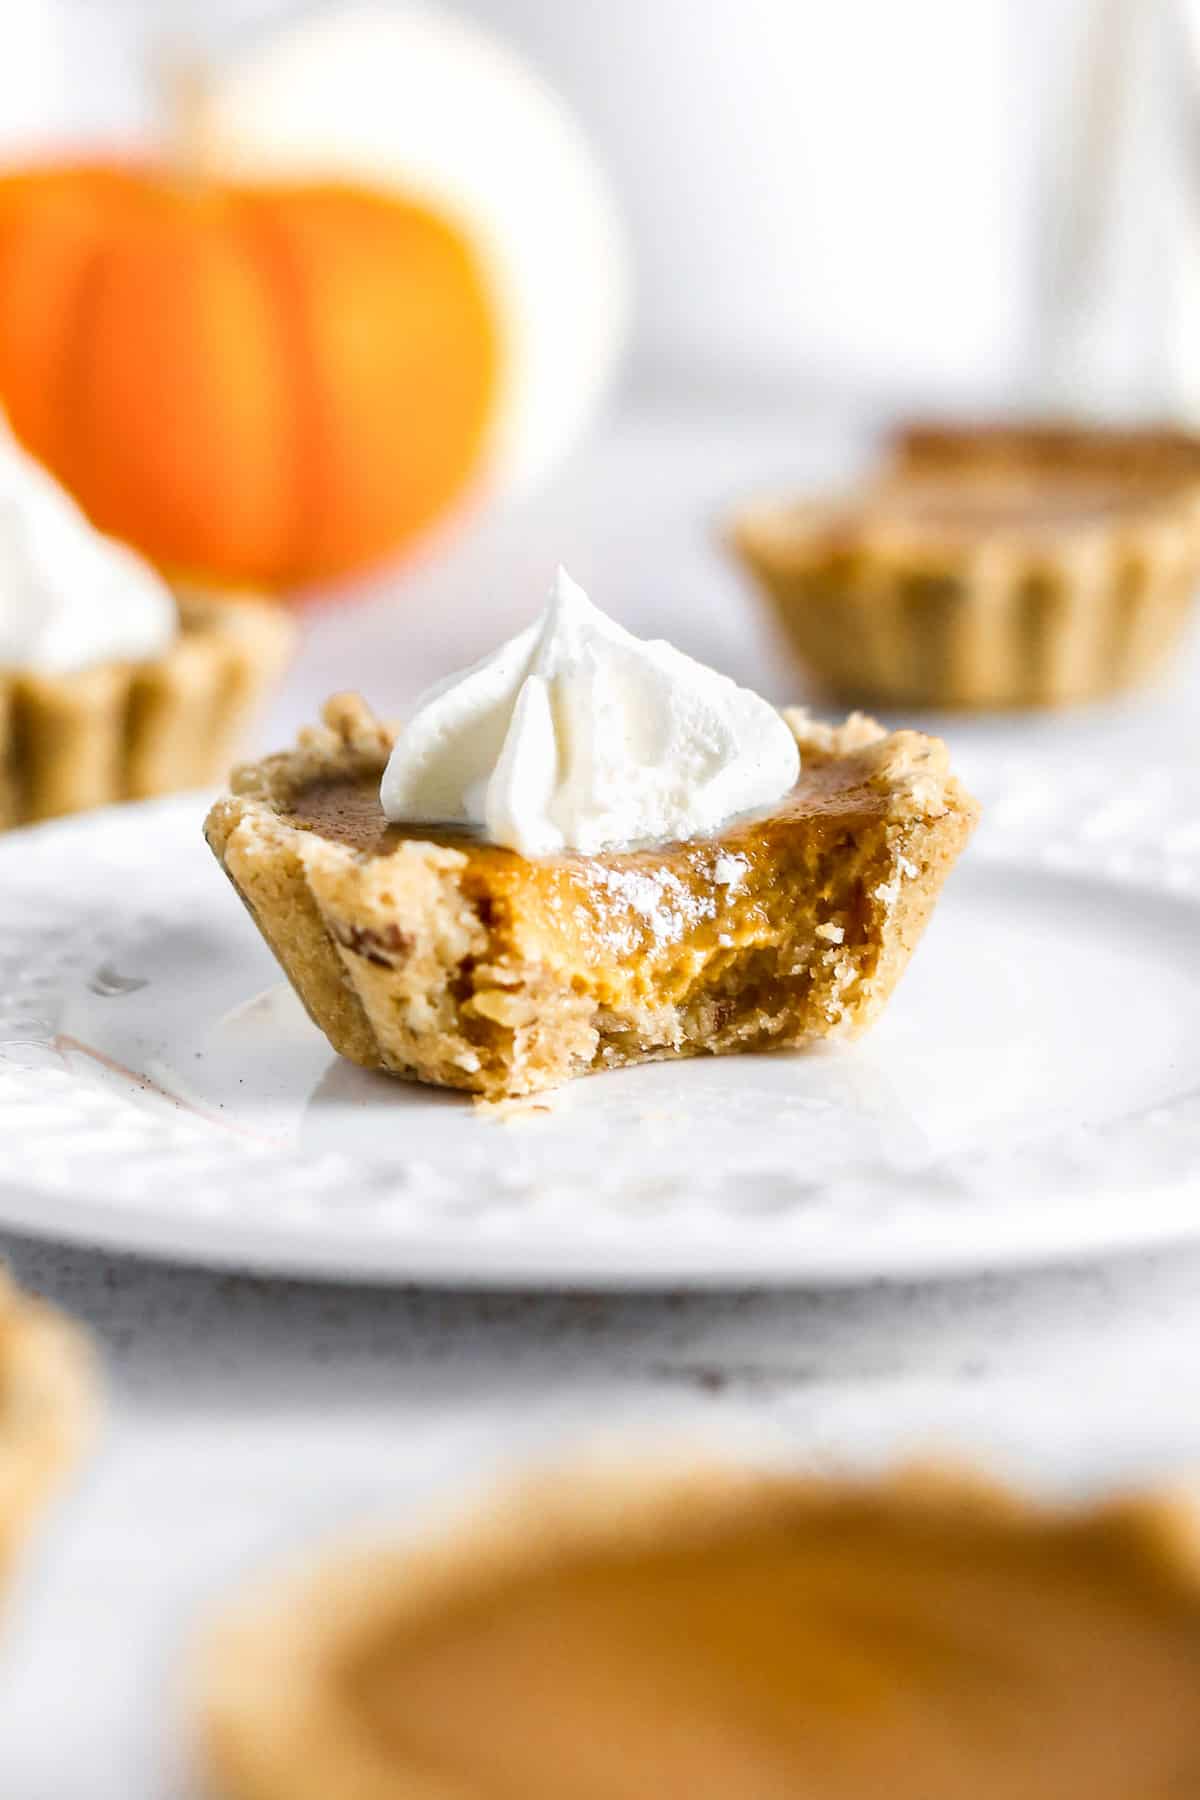 Pumpkin pie tartlet with a bite taken out of it on a plate.